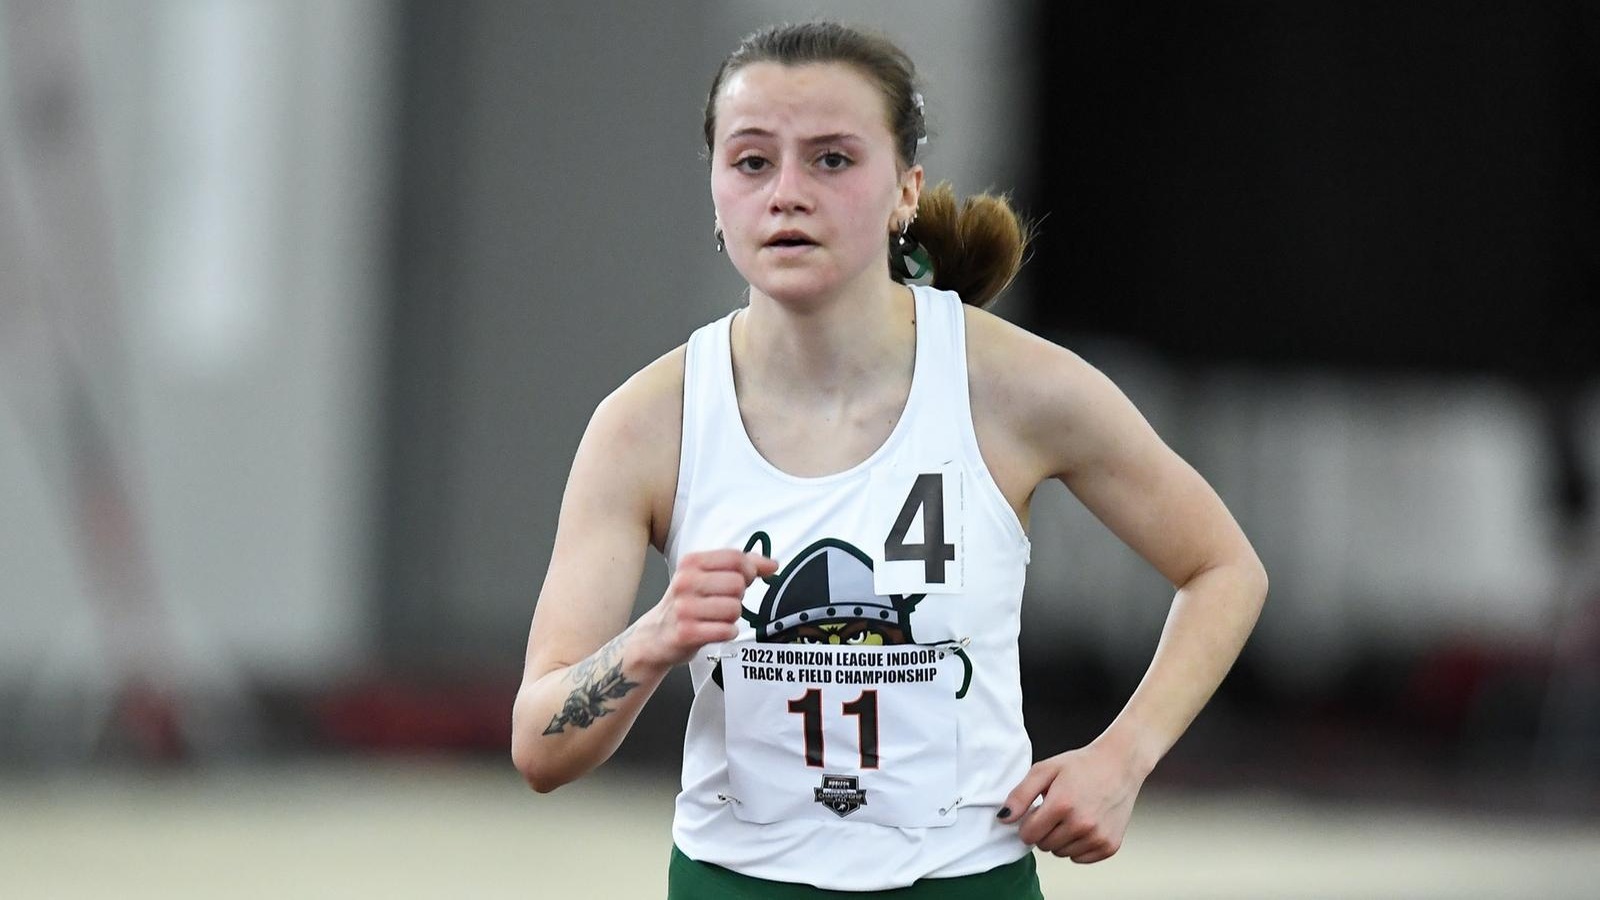 Cleveland State Track & Field Has Strong Showing At Cherry Blossom Invite